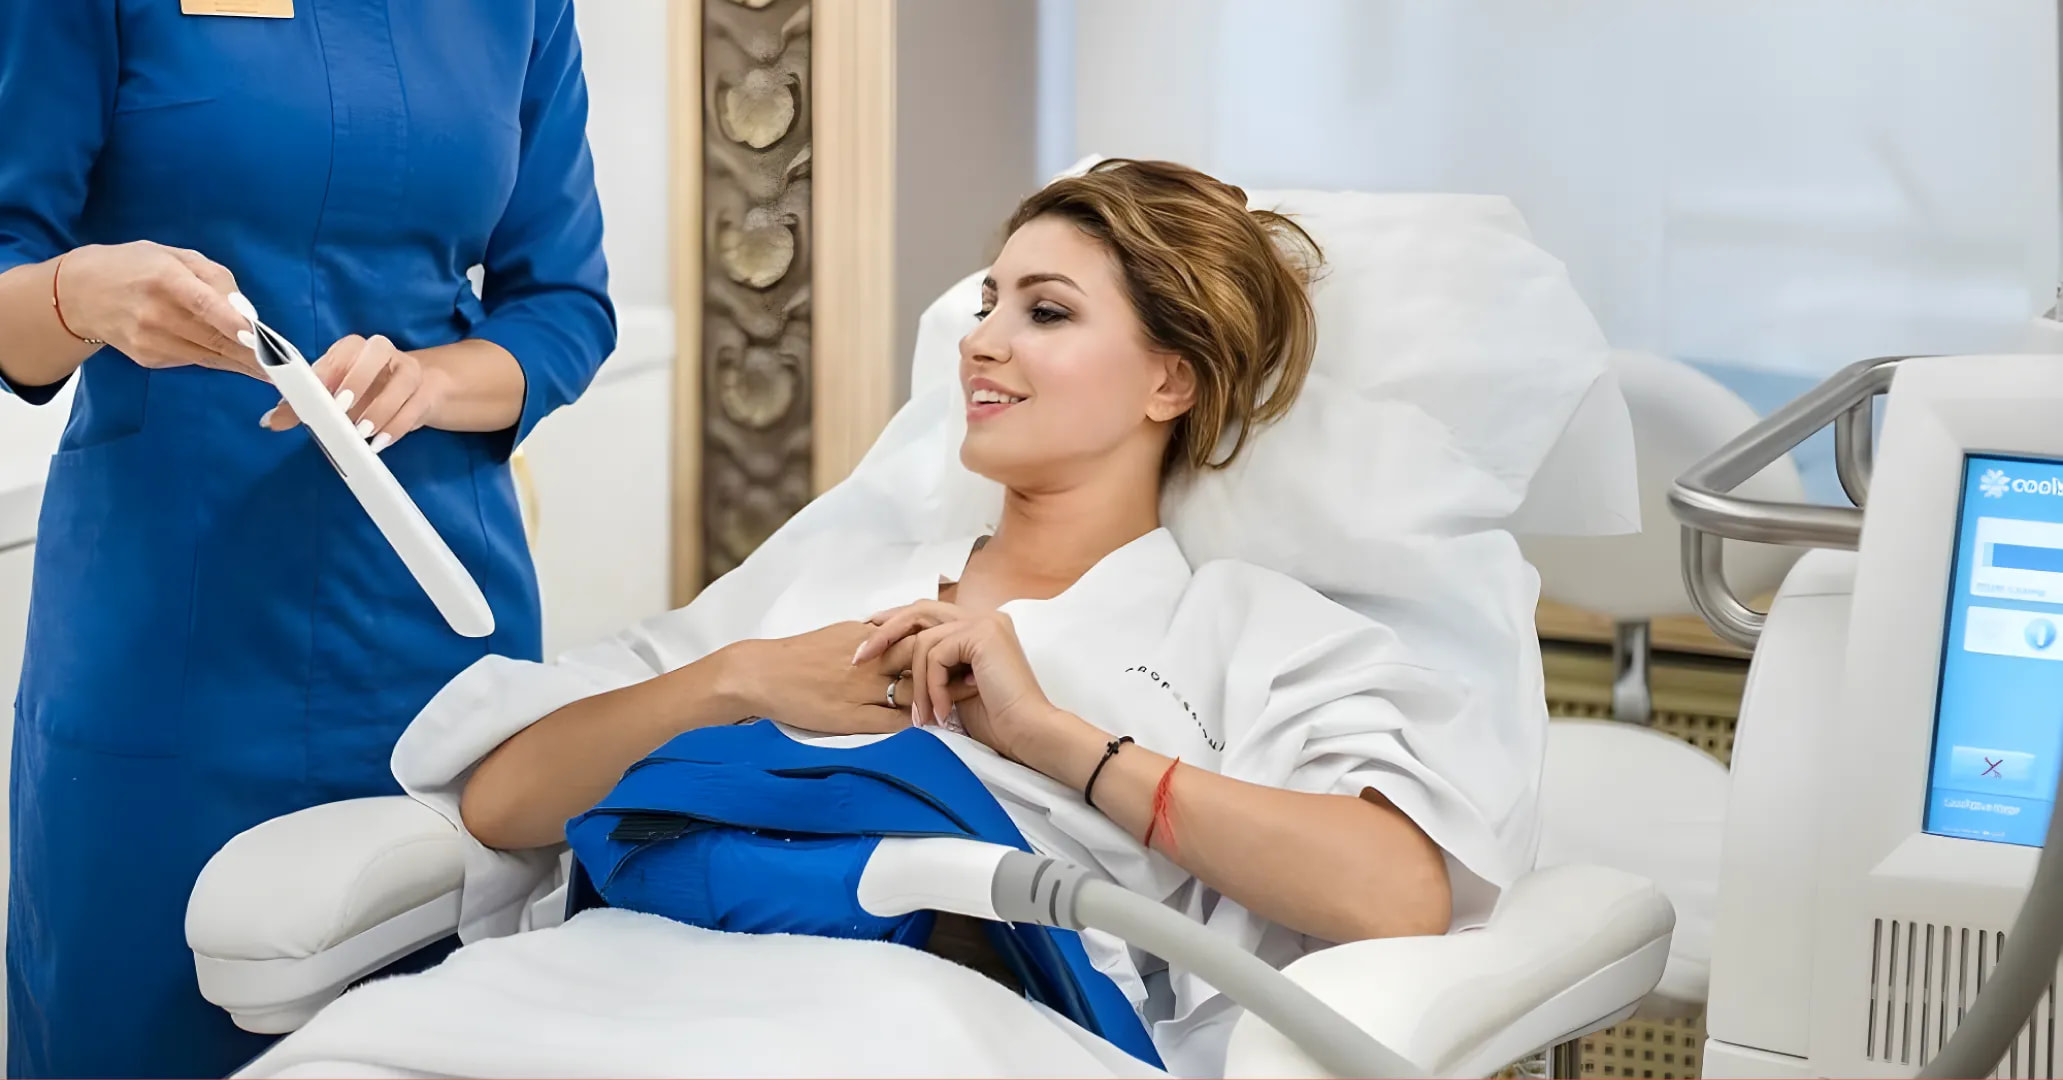 What is CoolSculpting? The Science Explained